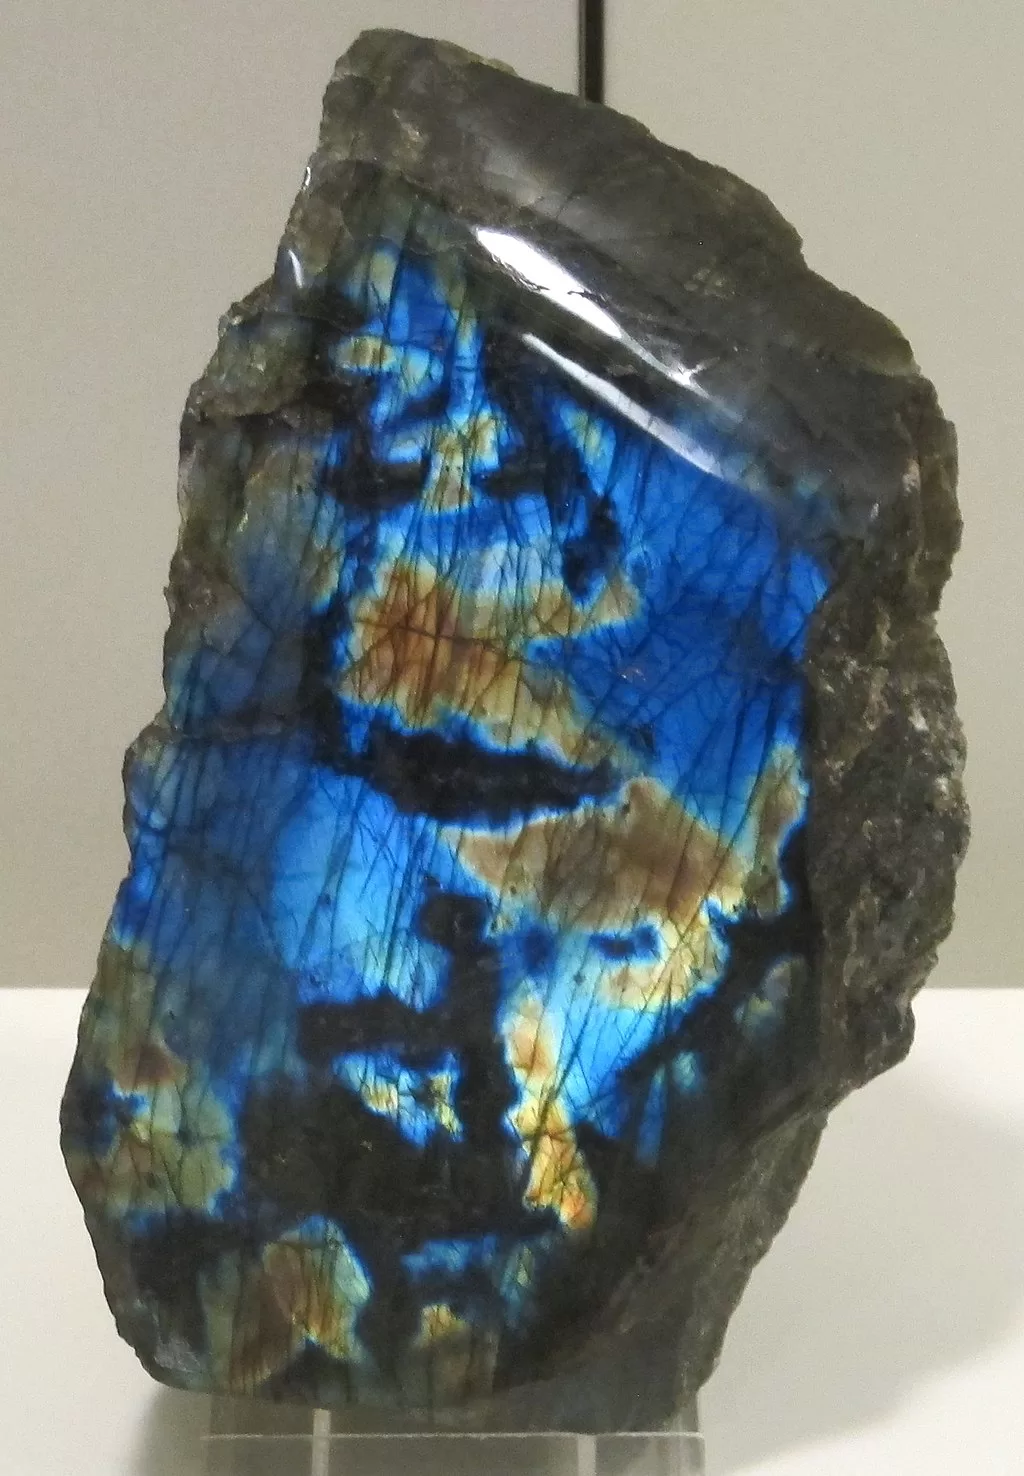 image - 5 Reasons to Add High Quality Labradorite to Your Home Collection